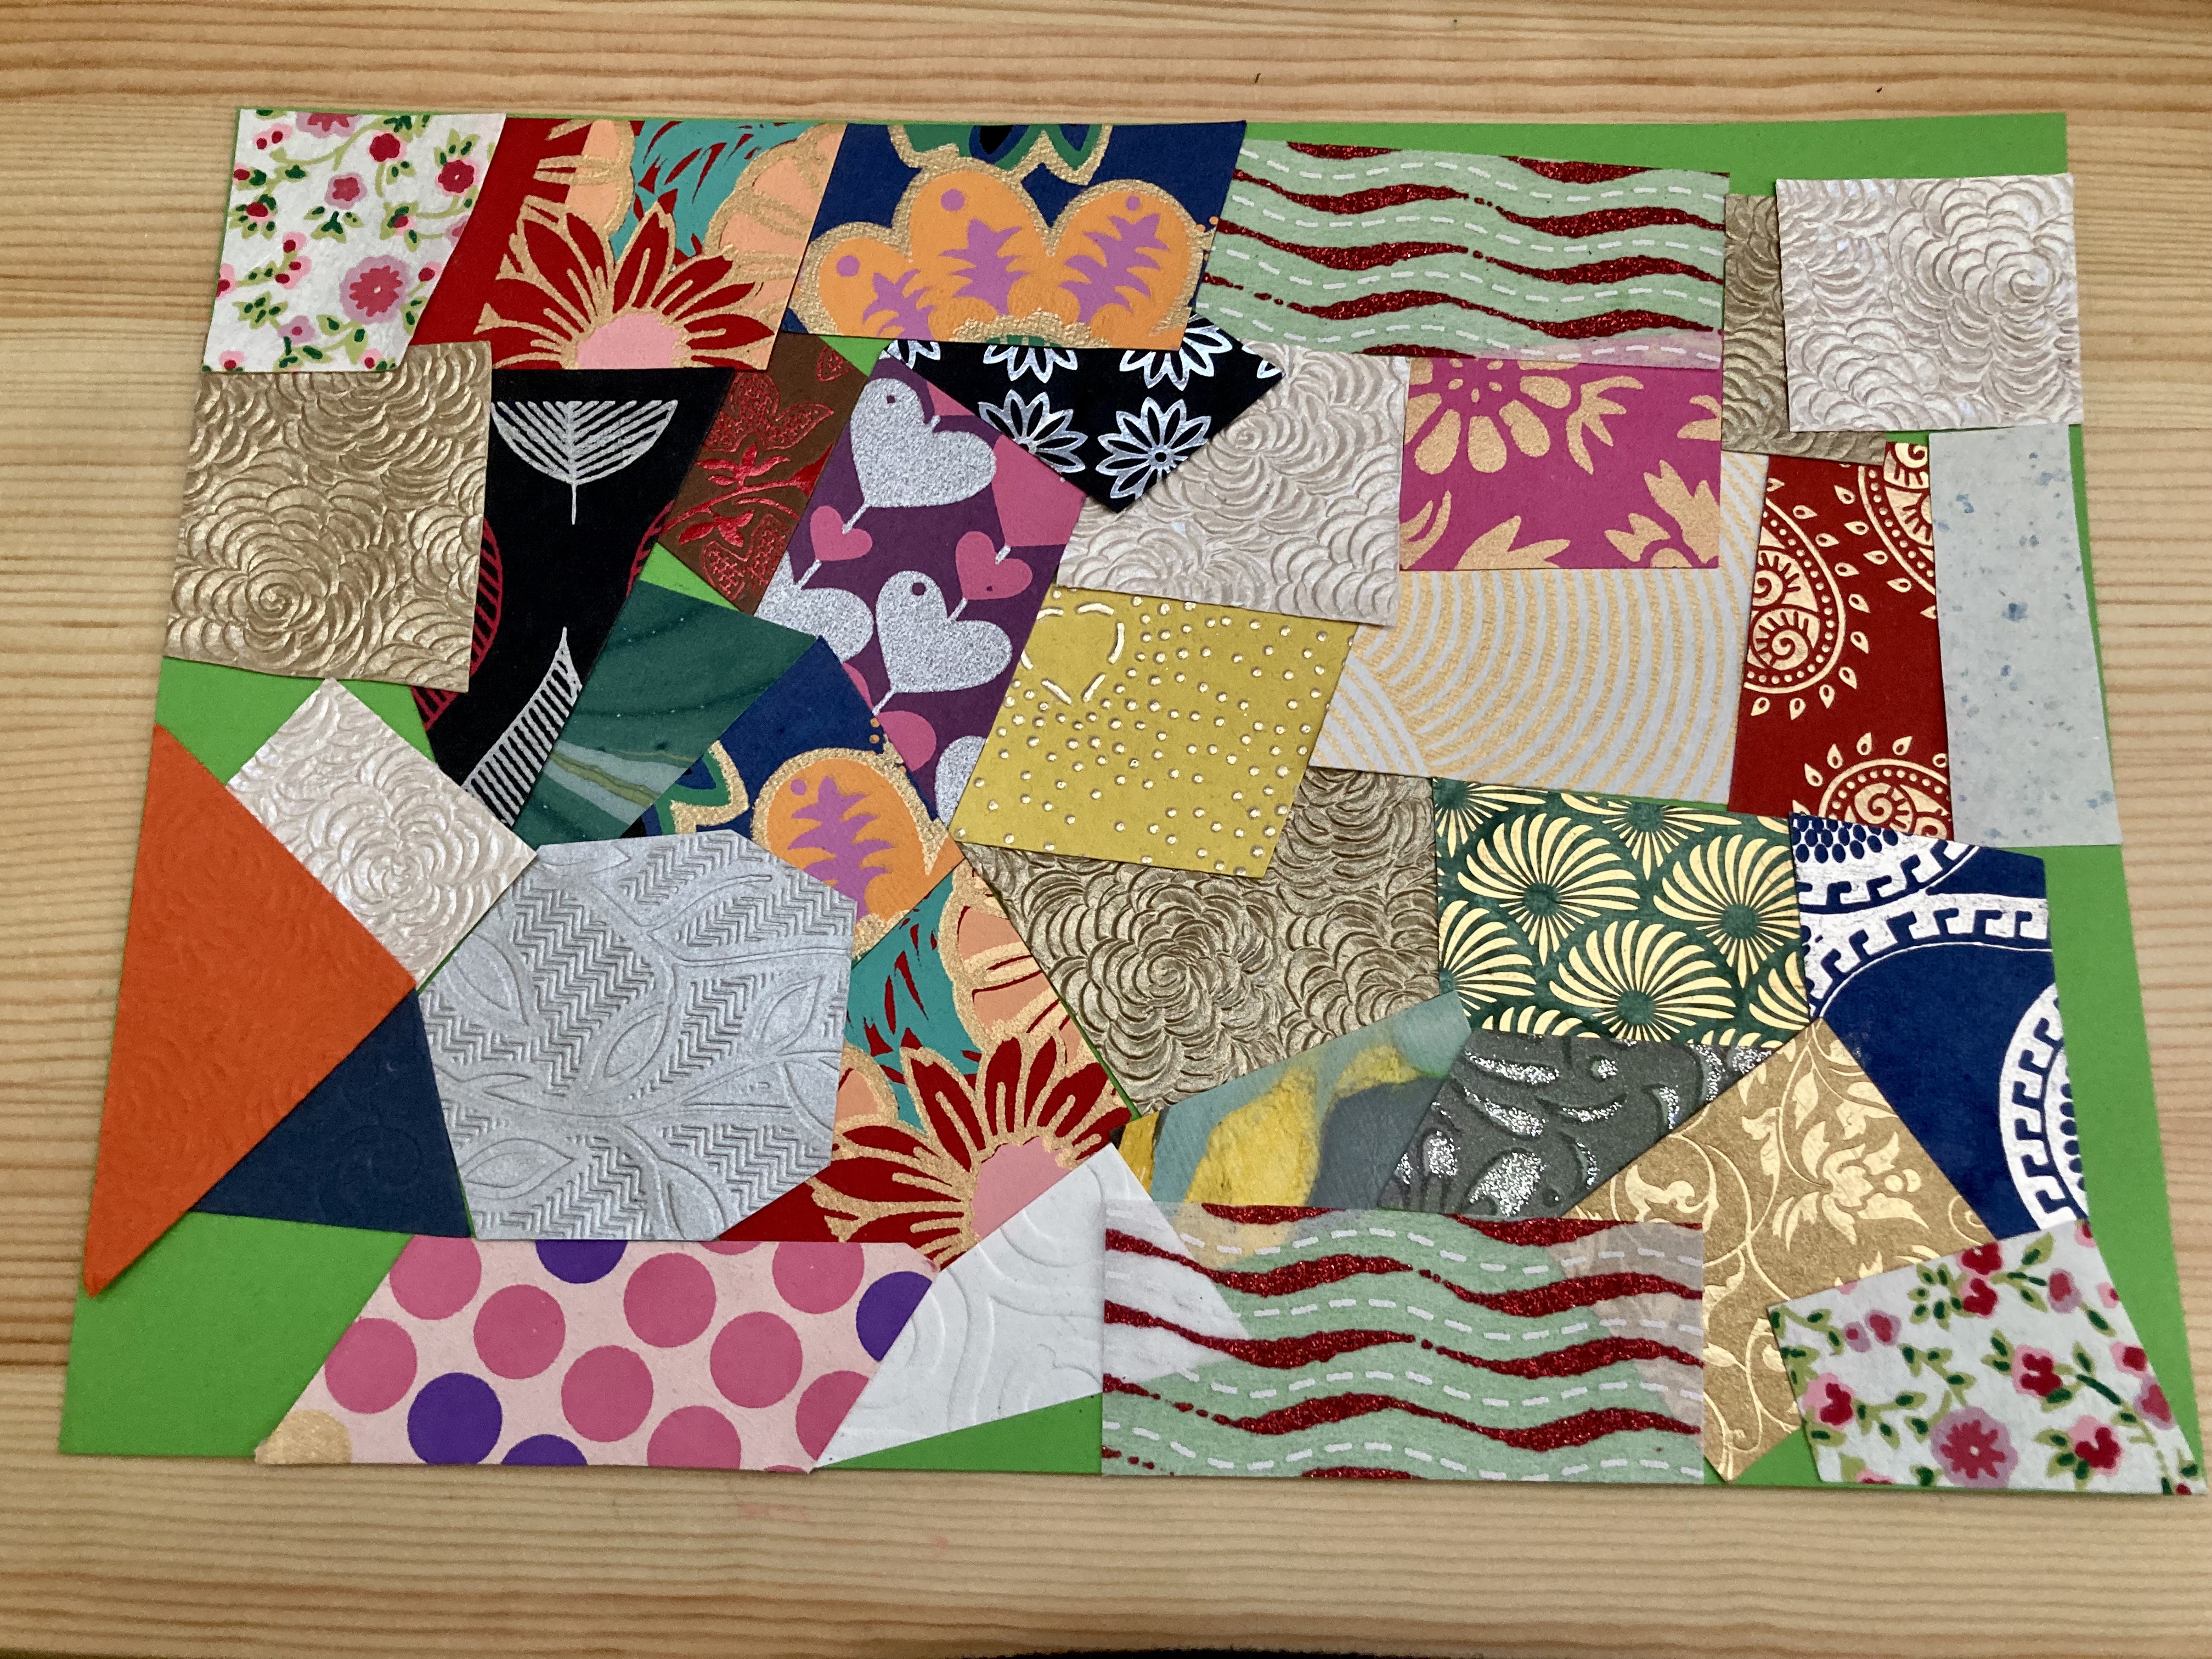 A collage of many small pieces of colourful paper and fabric.